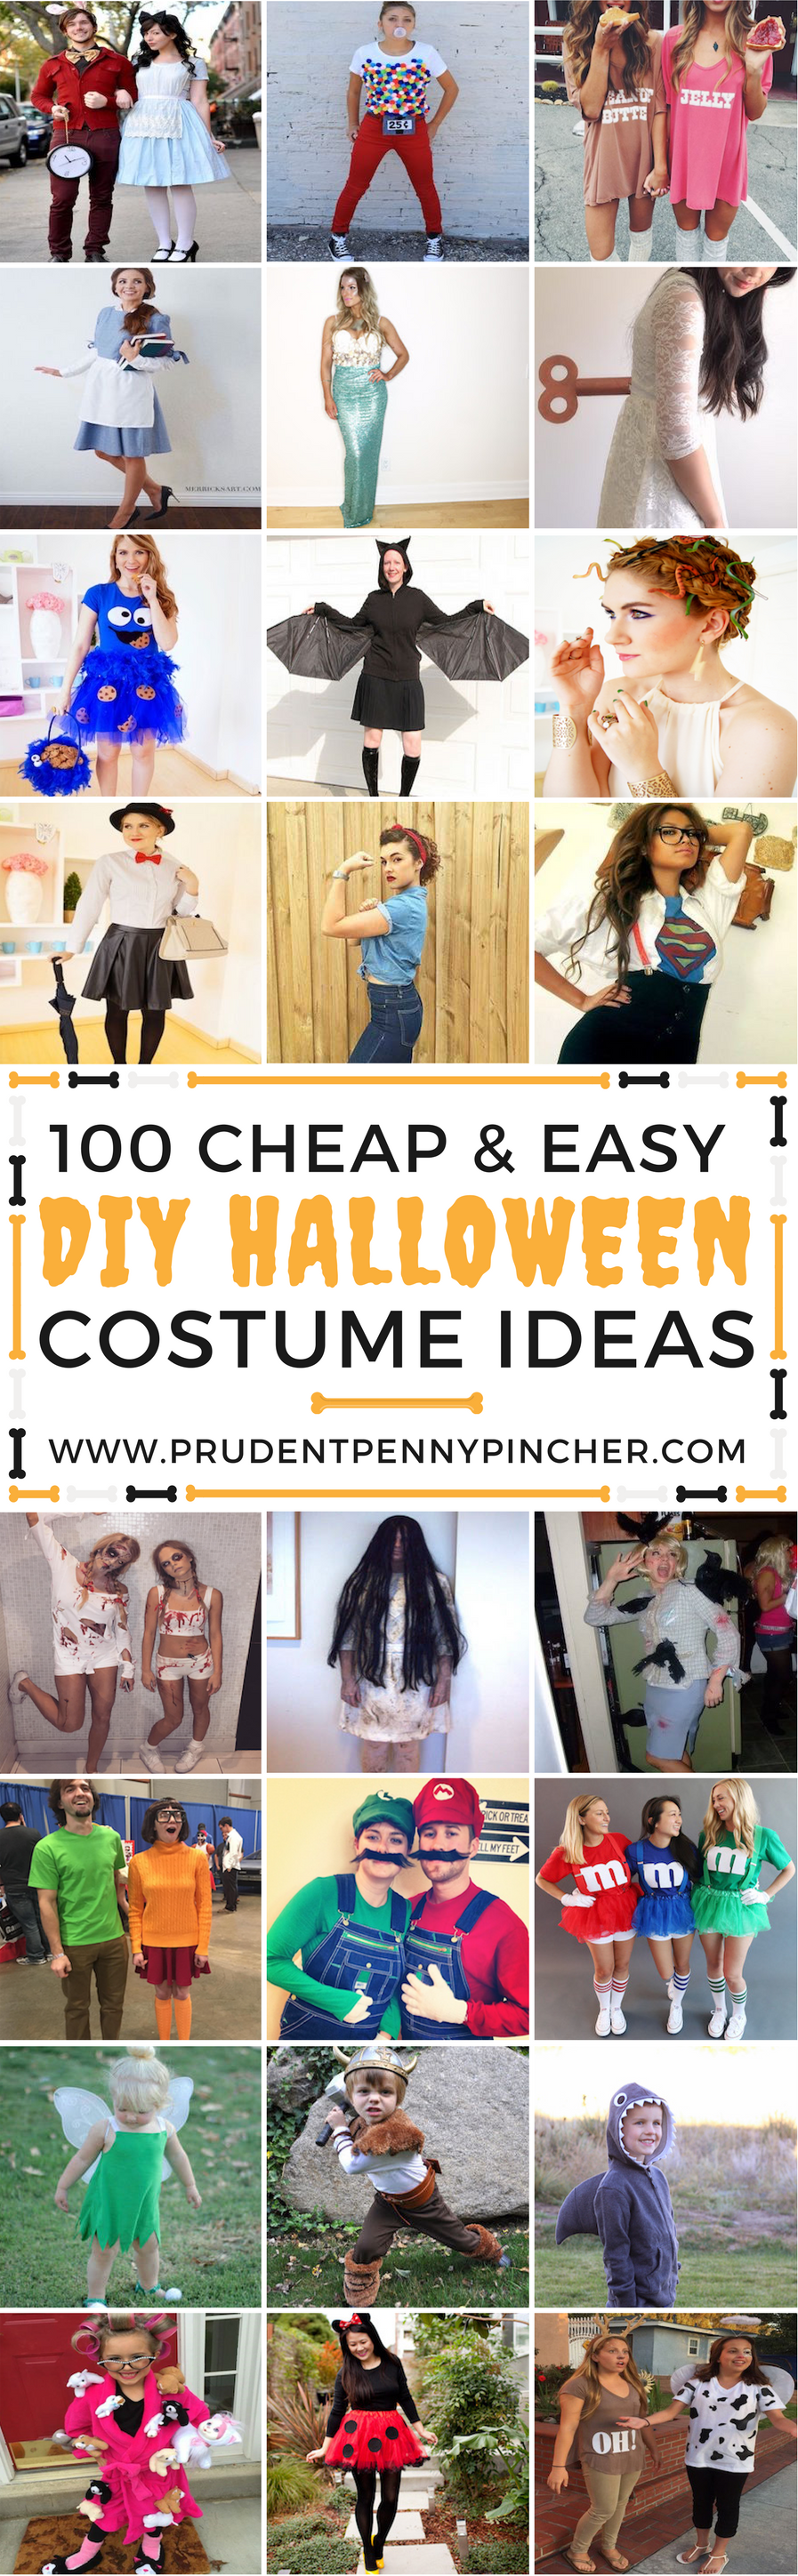 100 Cheap And Easy Diy Halloween Costume Ideas Prudent Penny Pincher